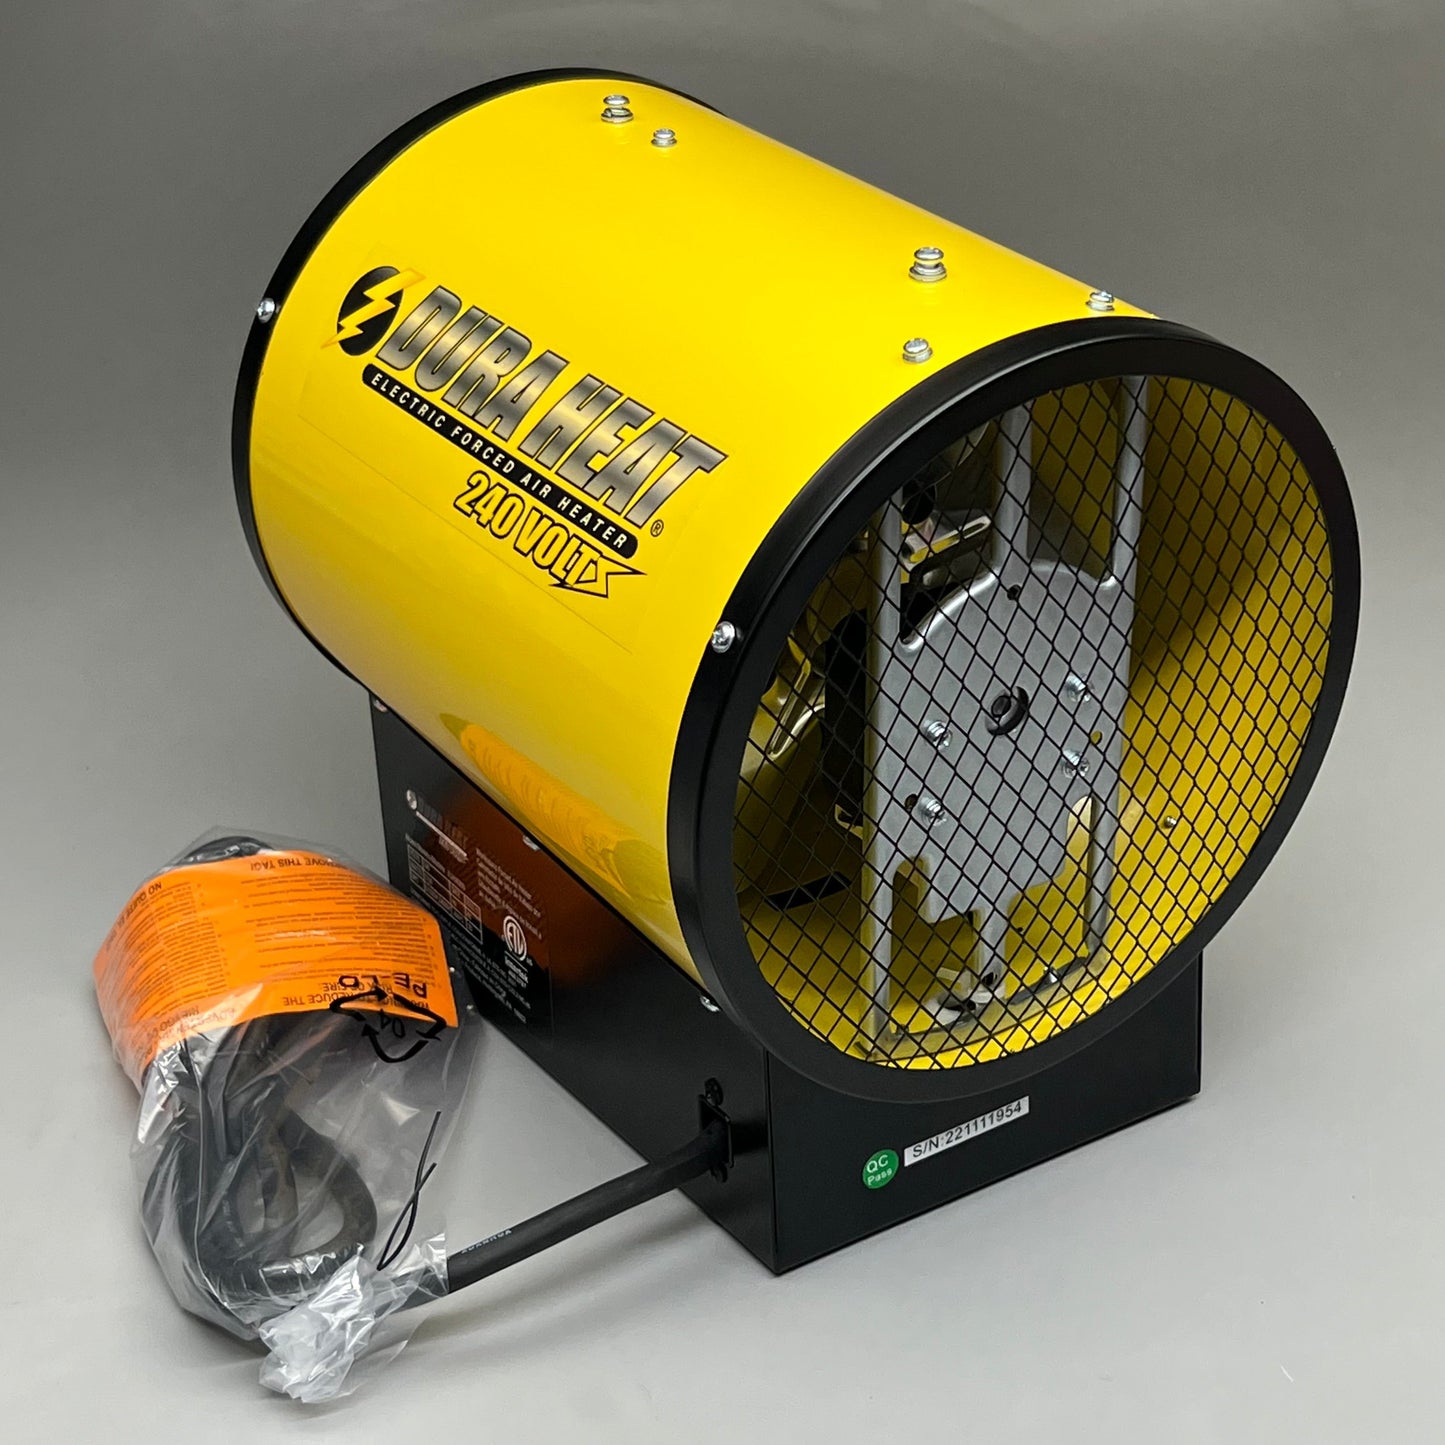 DURA HEAT 240V Portable Electric Forced Air Heater EUH4000 -Requires 240V Outlet